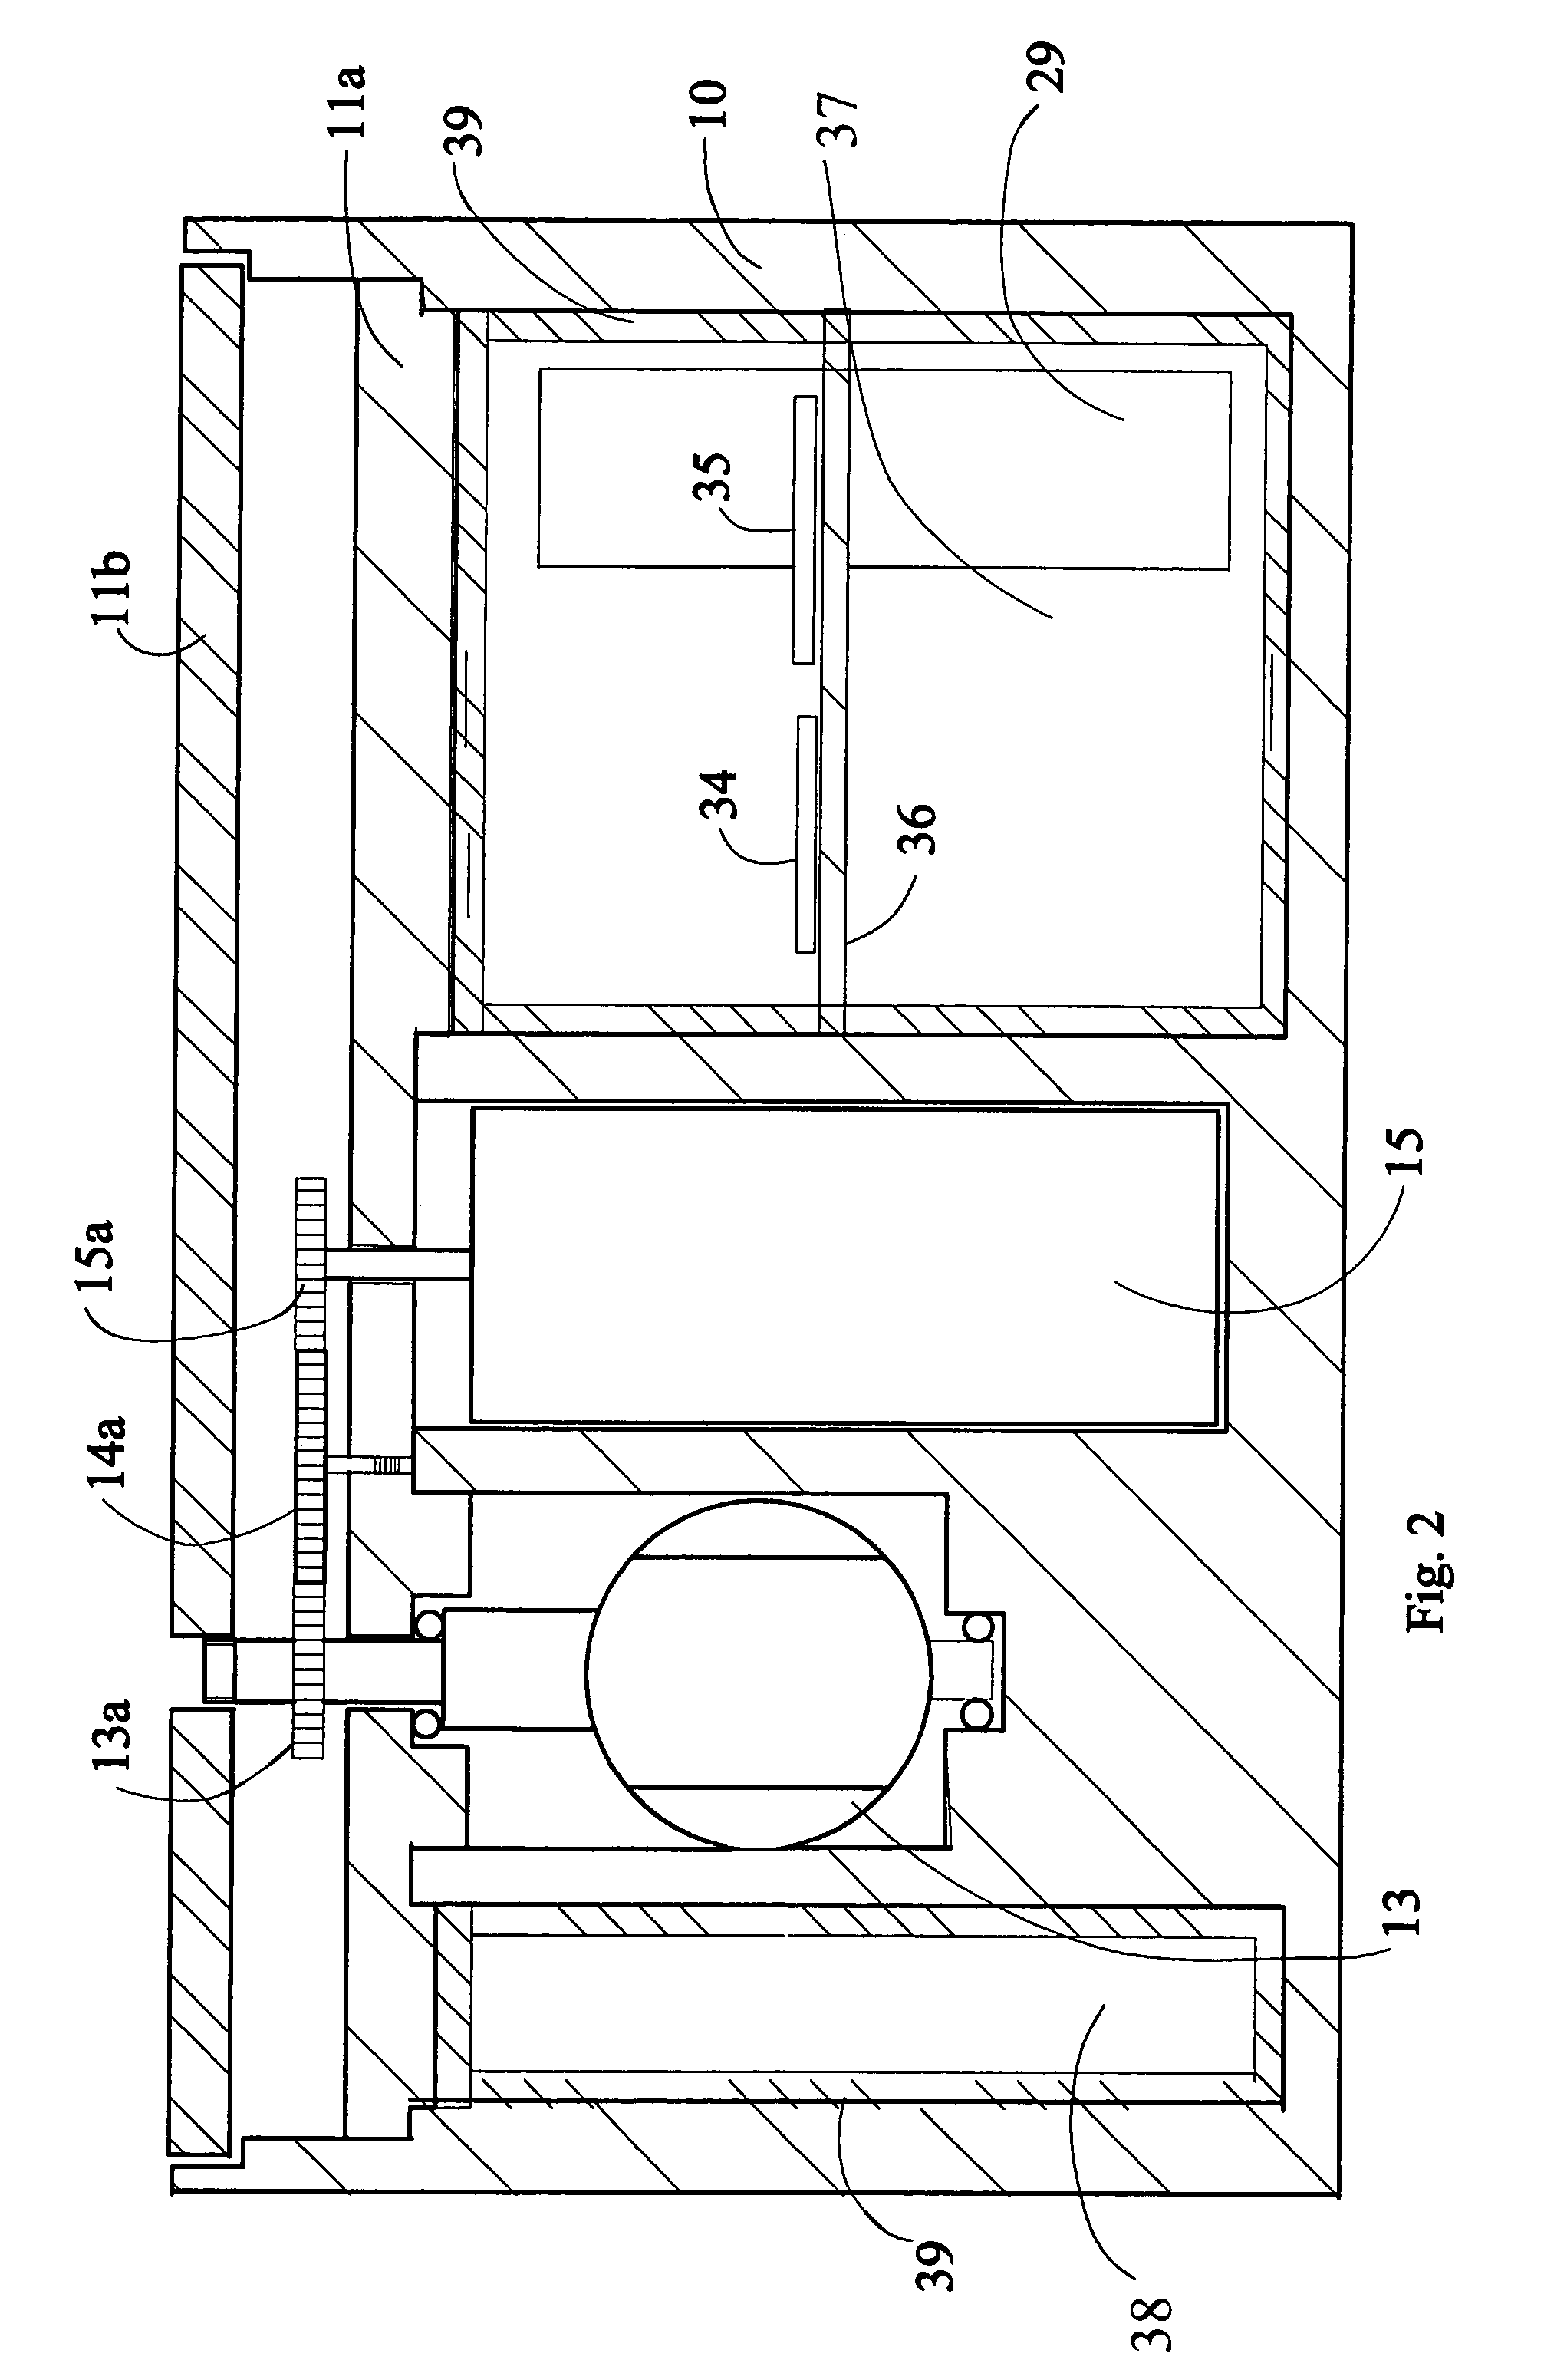 Remotely operated self-powered gas safety valve